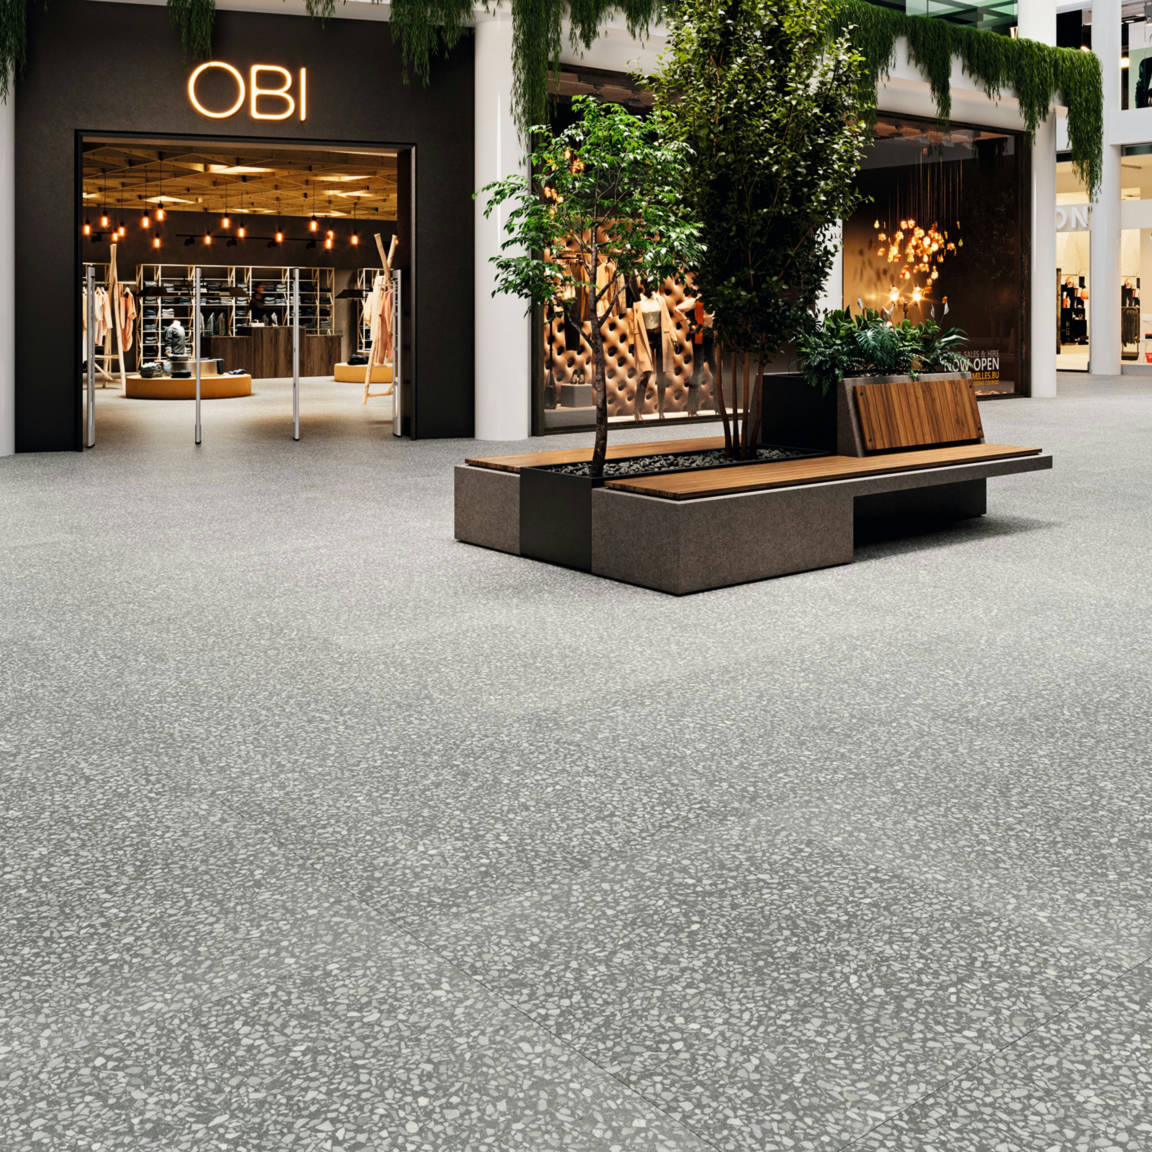 Obi_3_G | Stones And More | Finest selection of Mosaics, Glass, Tile and Stone